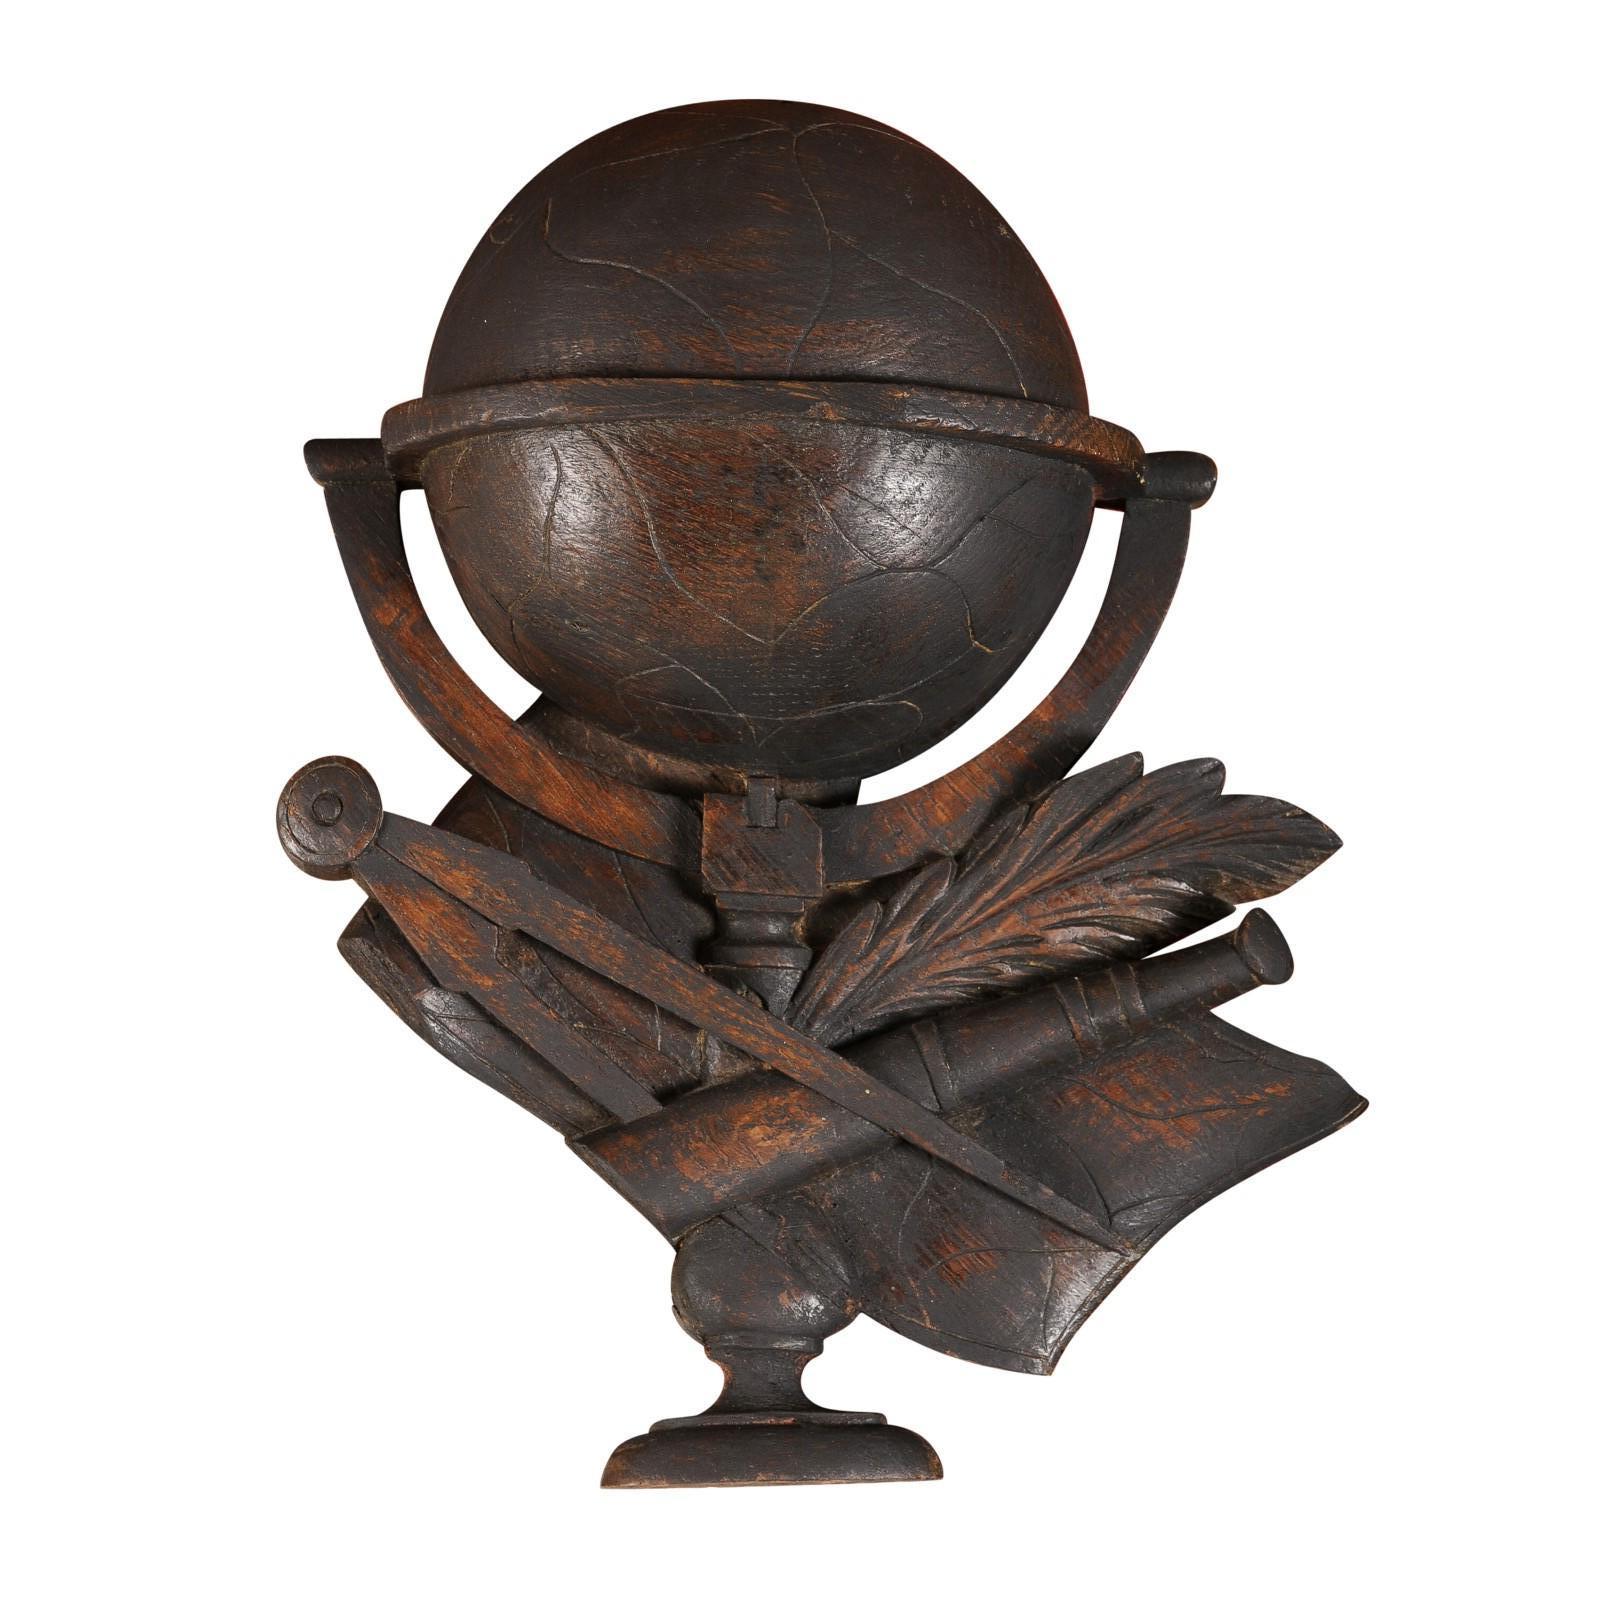 A French carved oak wall sculpture from the 19th century, depicting scientific instruments. Those instruments include a globe, compass, spyglass and quill. Embracing the intricate artistry of 19th-century French craftsmanship, this carved oak wall